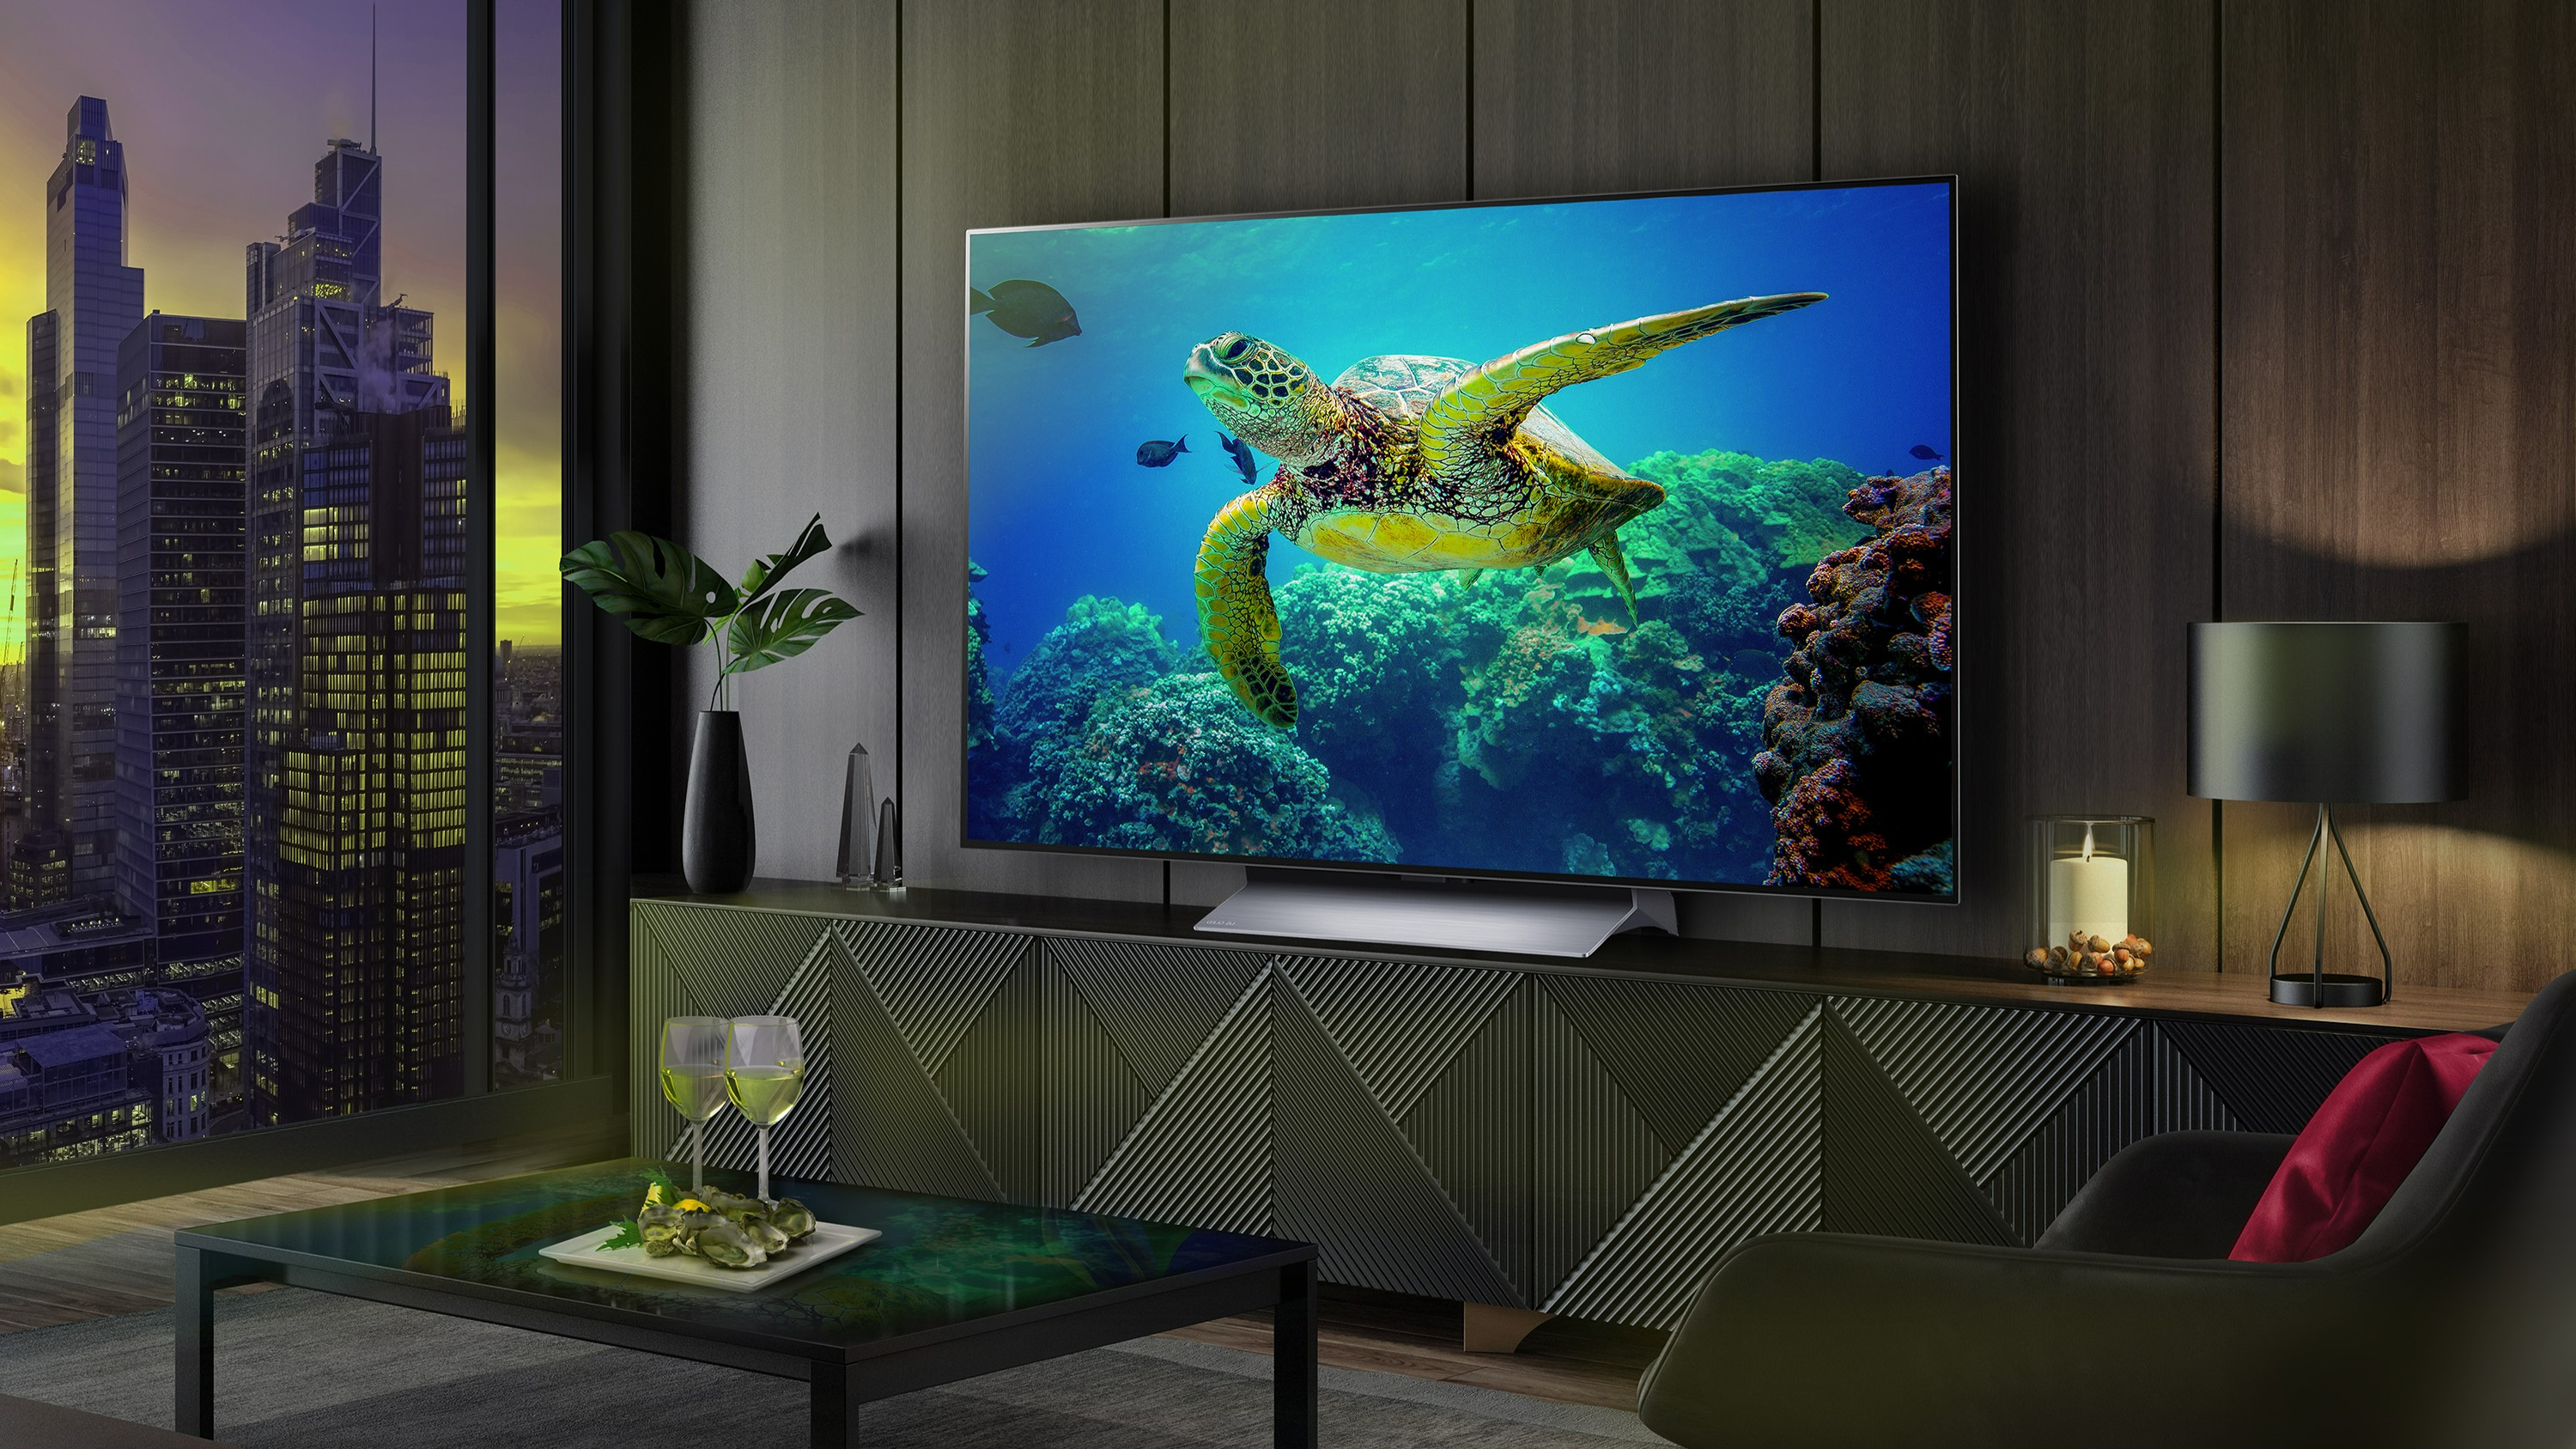 LG C3 OLED TV: 4 upgrades we expect to see